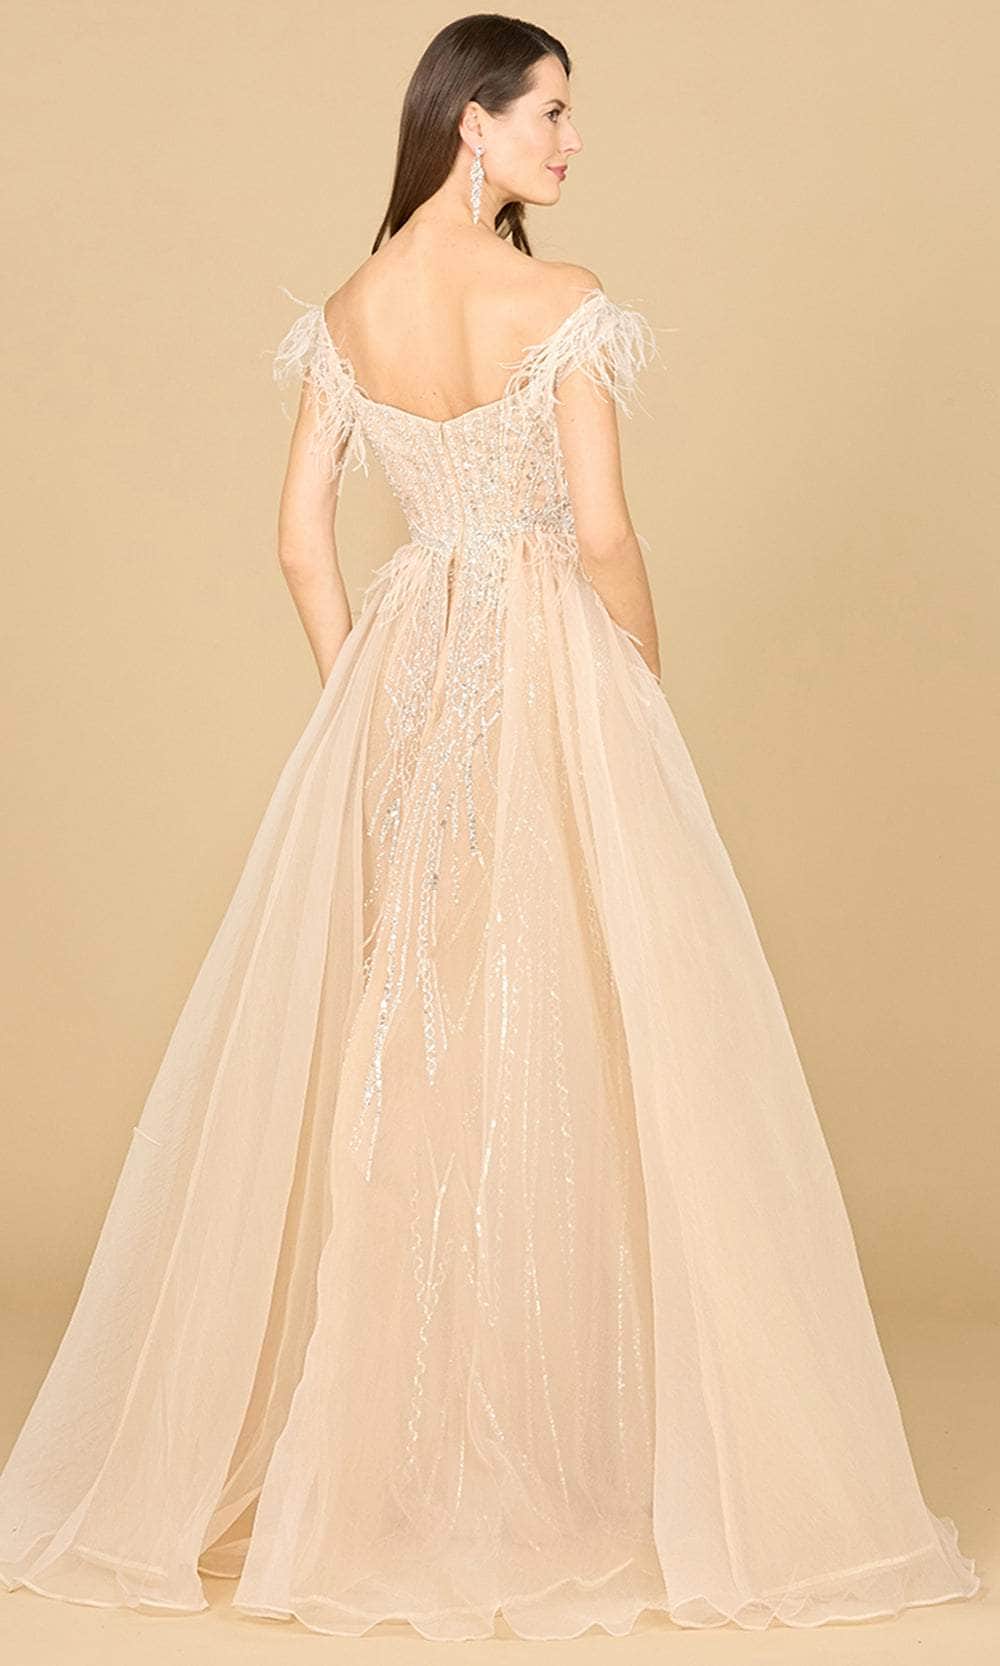 Image of Lara Dresses 29161 - Off-Shoulder Feather Detailed Evening Gown